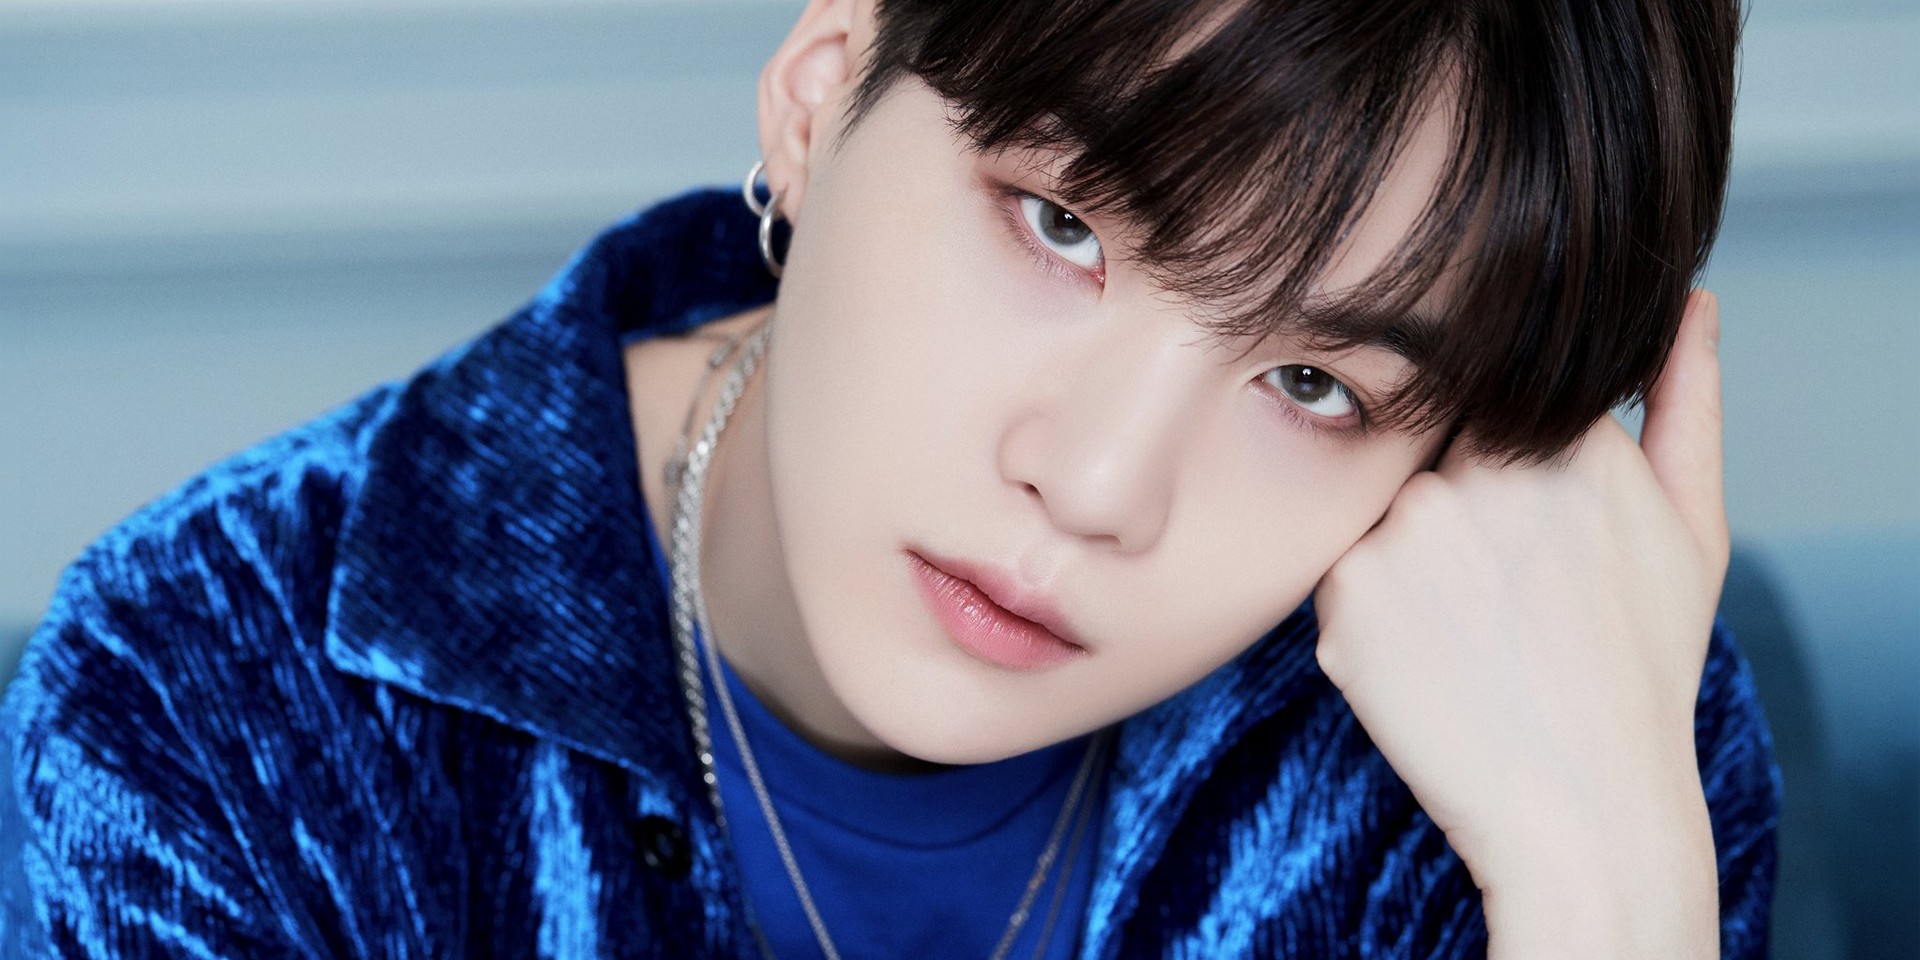 BTS' Suga celebrates 28th birthday with donation to children with